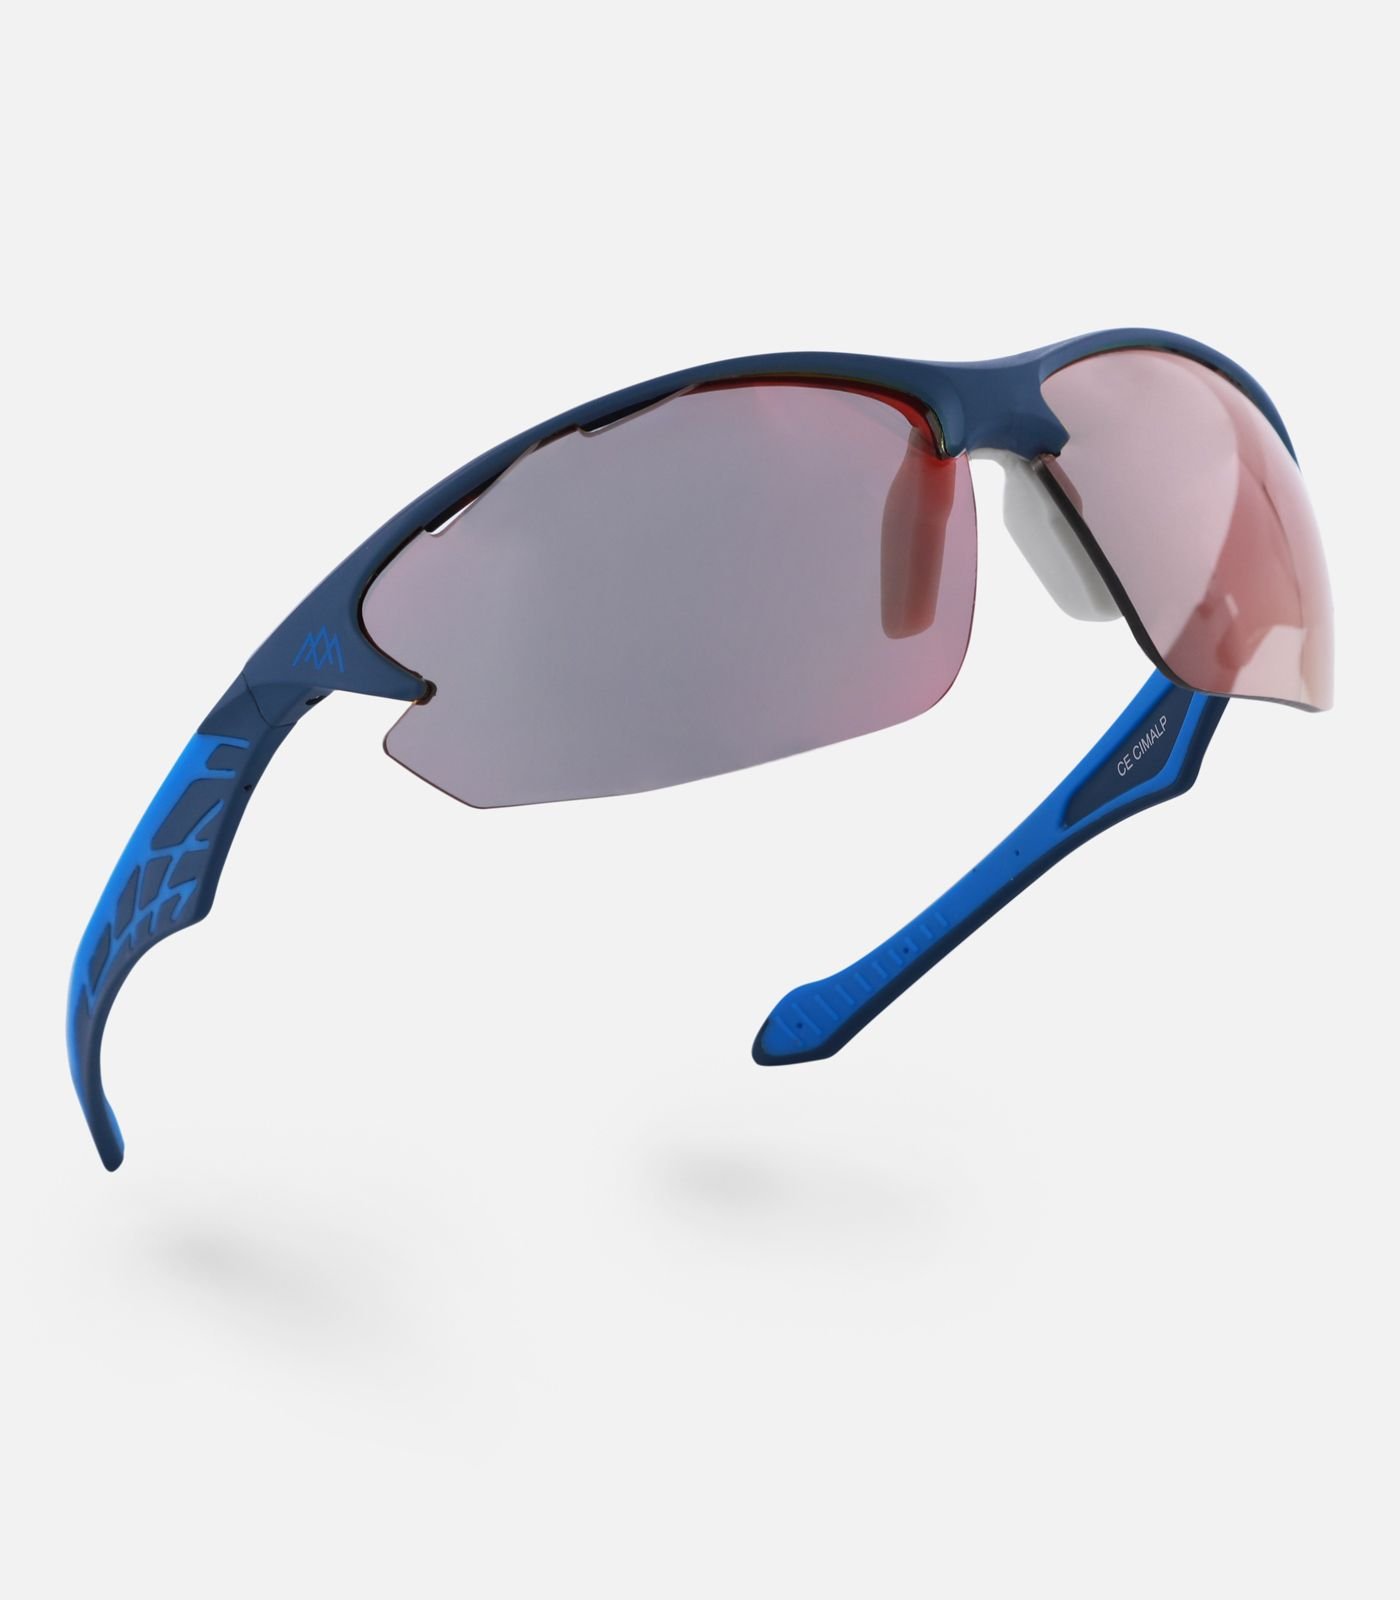 Photochromic Sunglasses with additional lenses